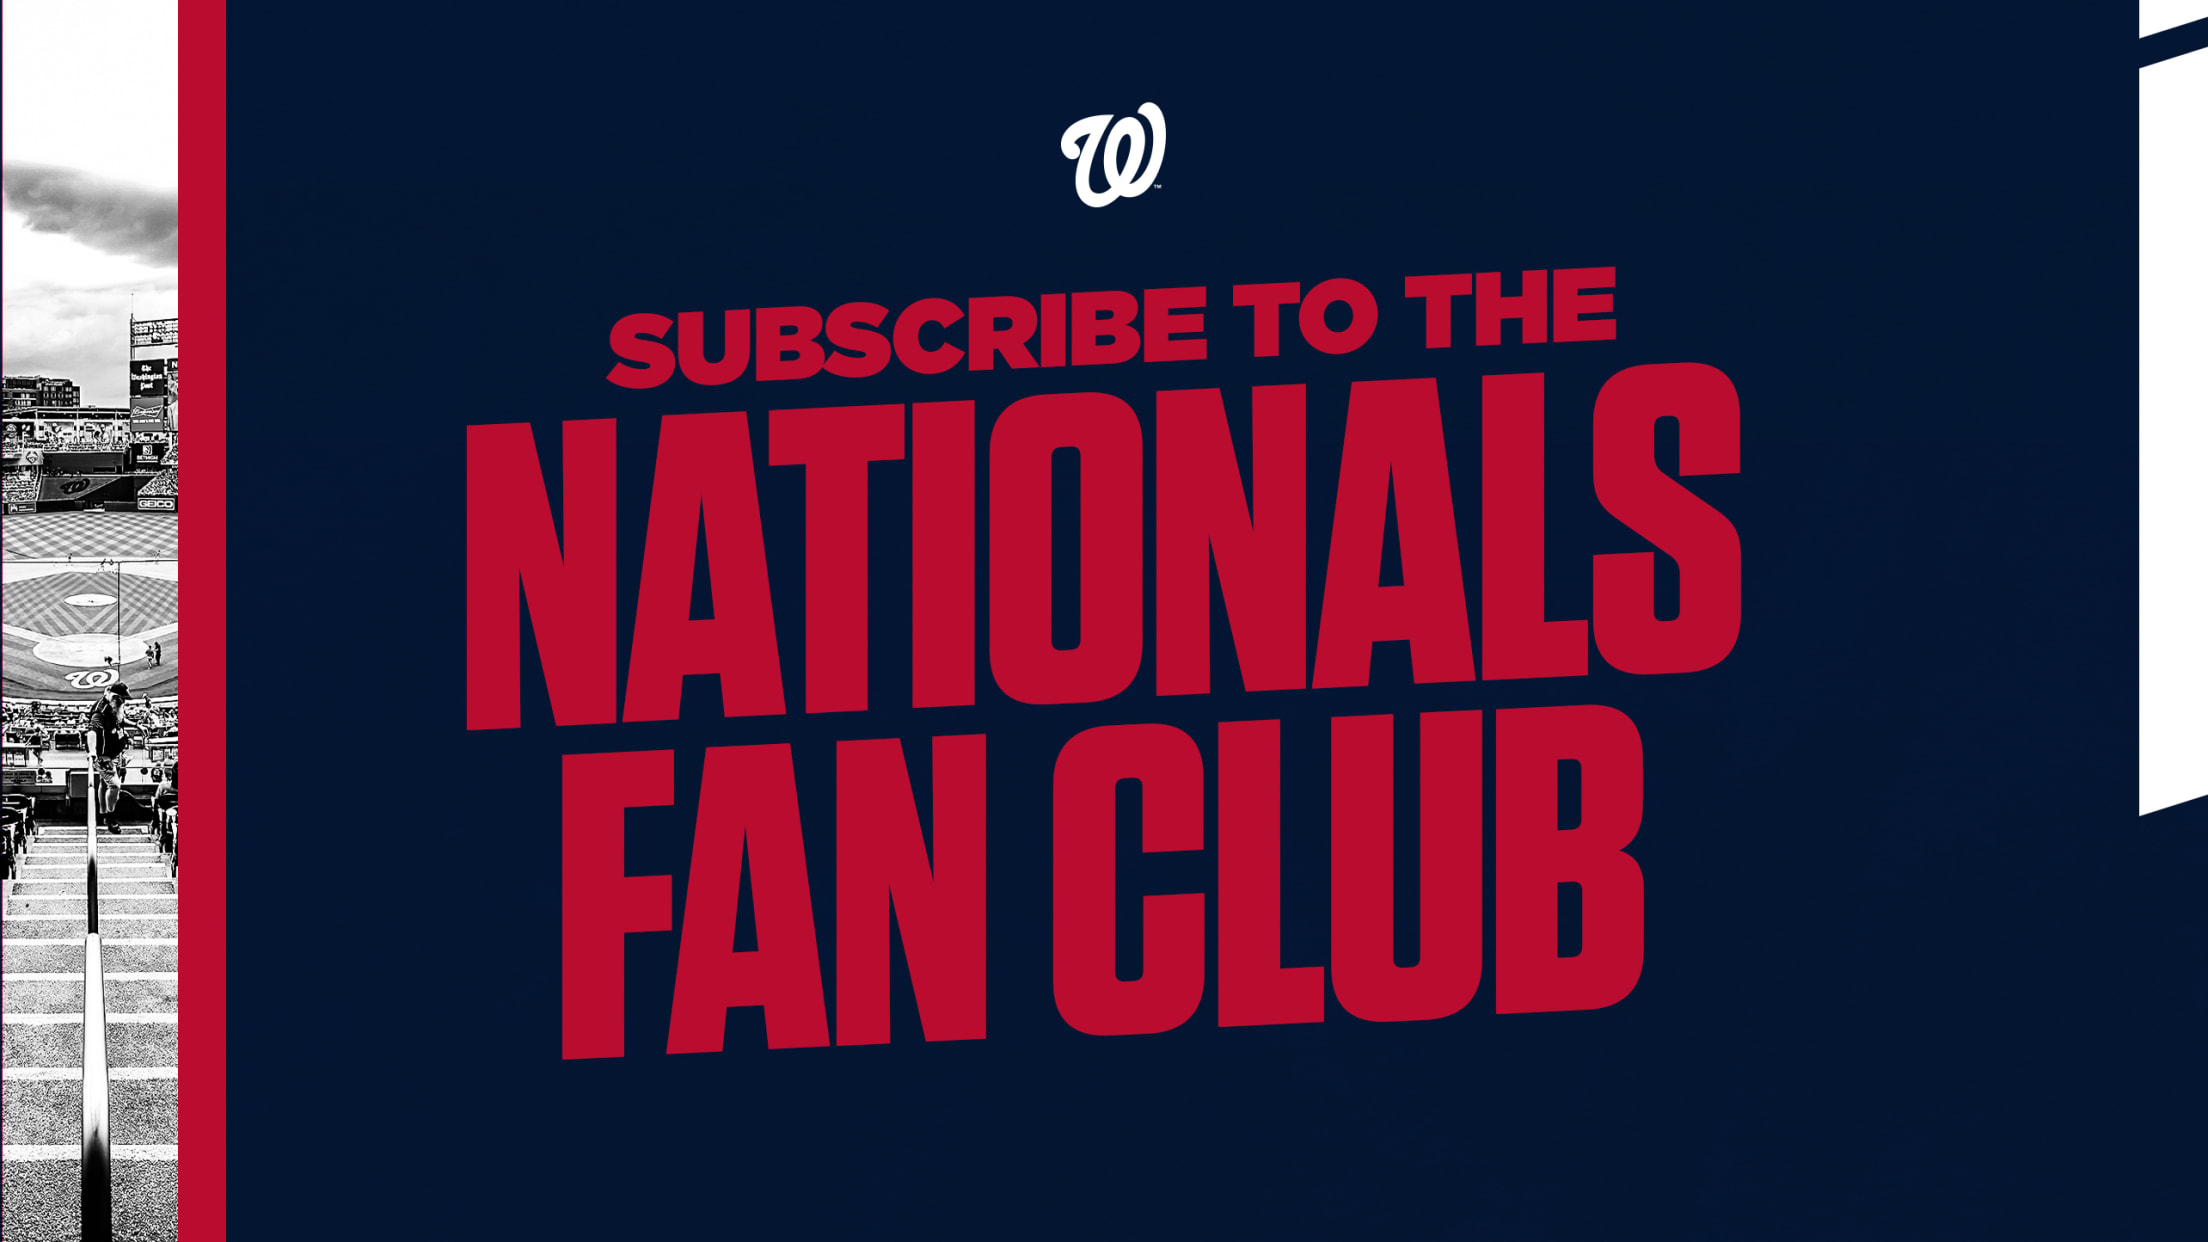 Every Promotion the Nationals are Offering This Season